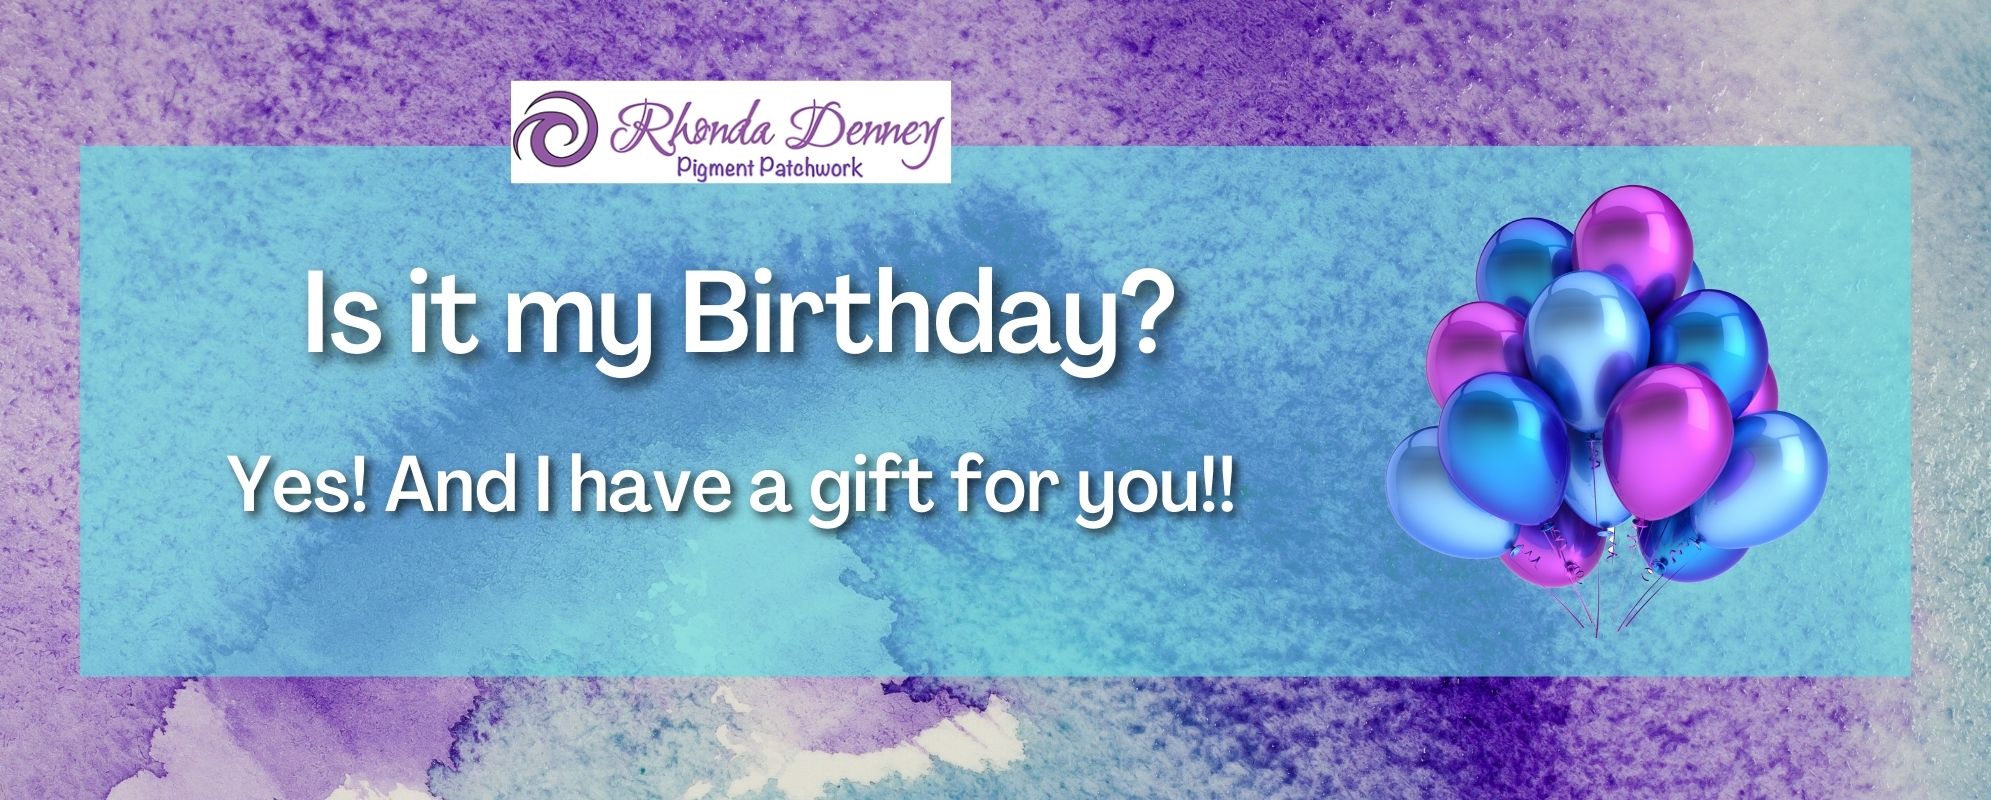 Rhonda Denney - Is it my Birthday? Yes! And I have a gift for you!